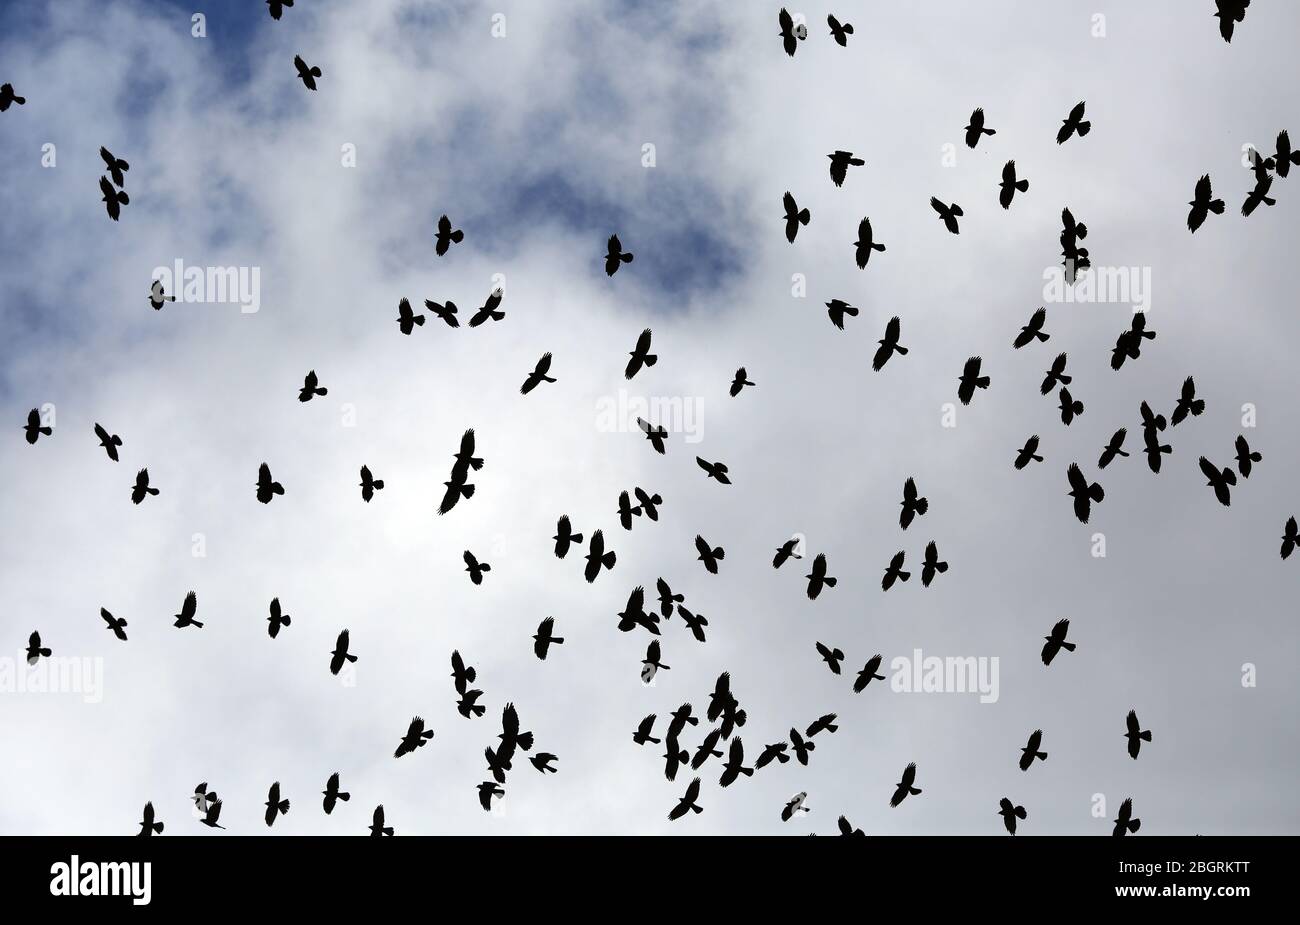 A flock of crows (or murder) against a cloud Stock Photo